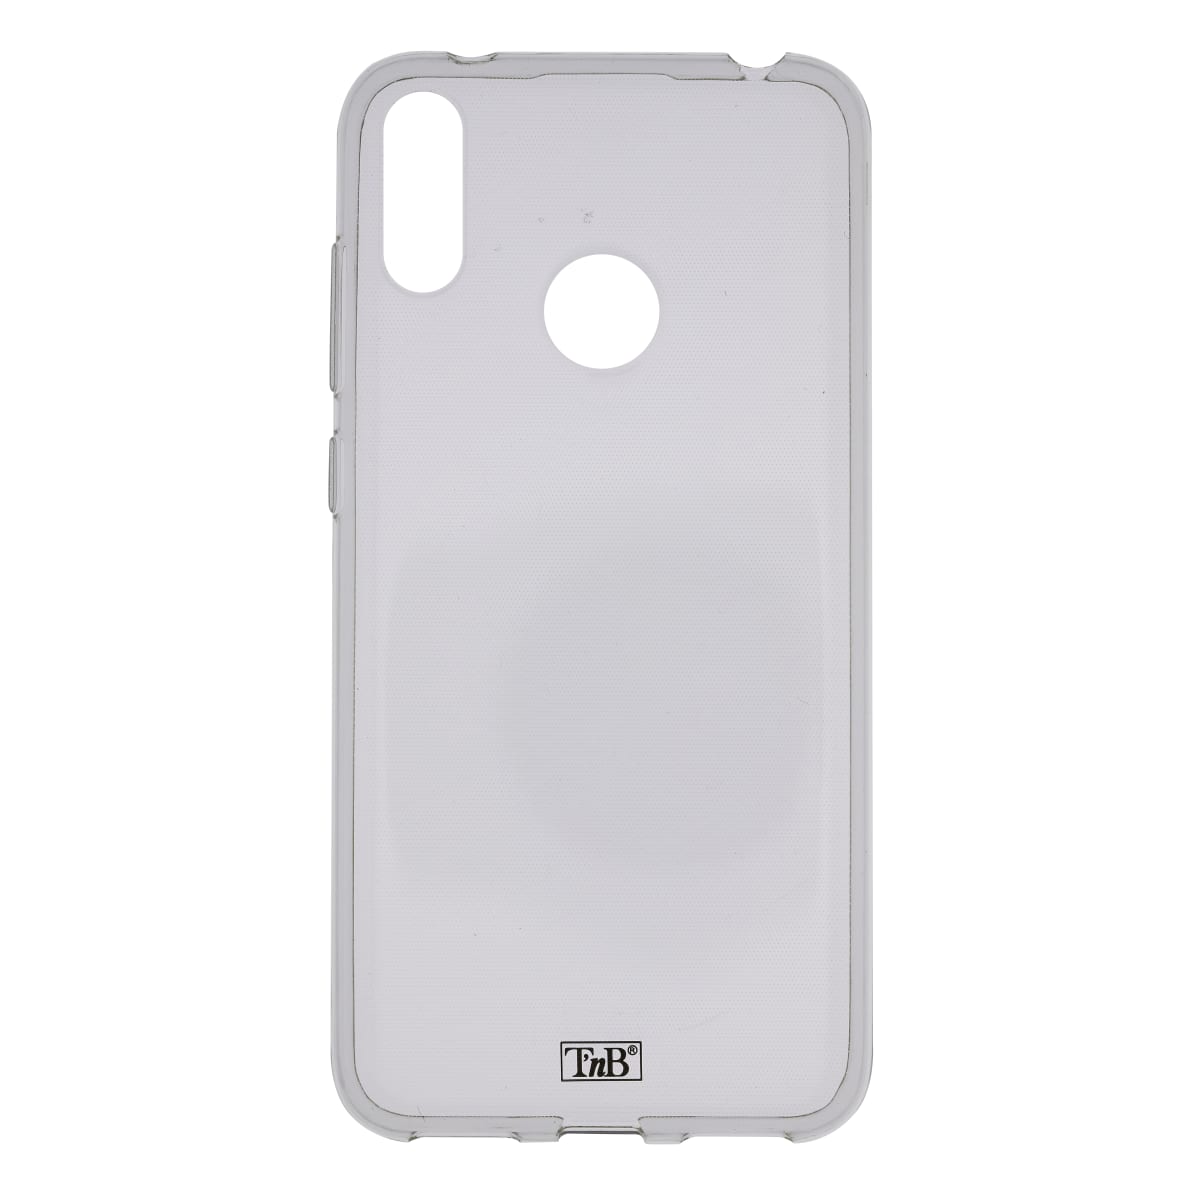 SOFT CASE TRANSPARENT FOR HUAWEI Y6 2019